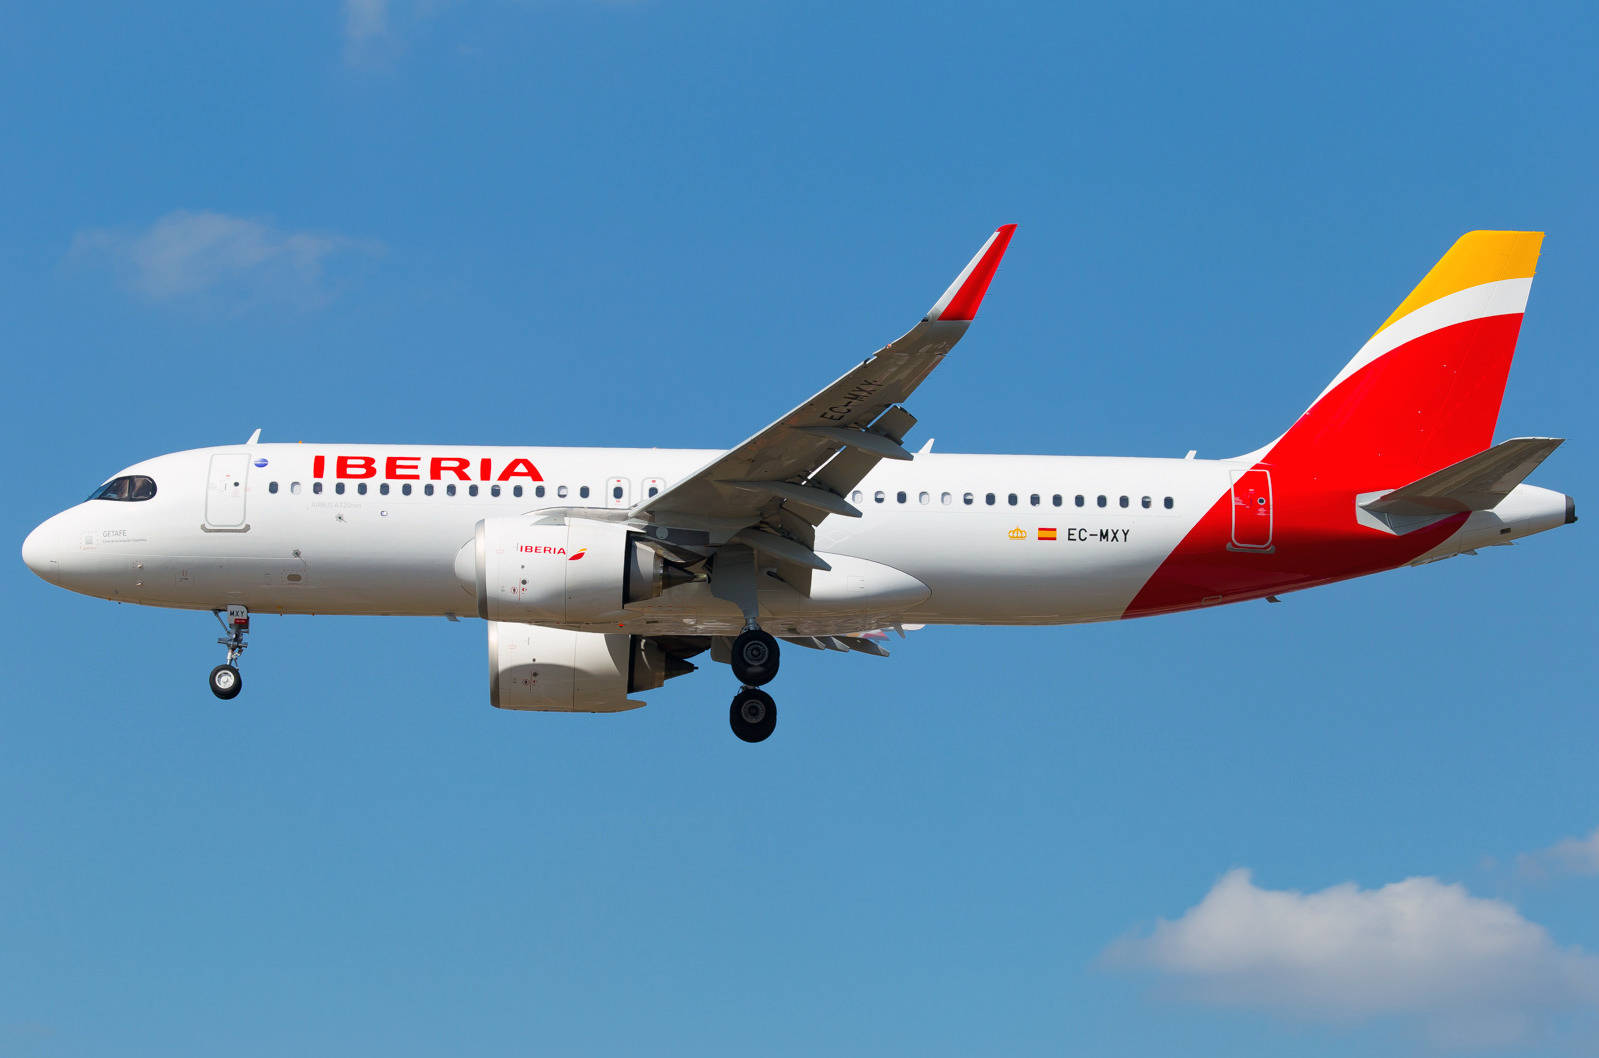 Iberia Airlines Airplane in Steady Flight. Wallpaper